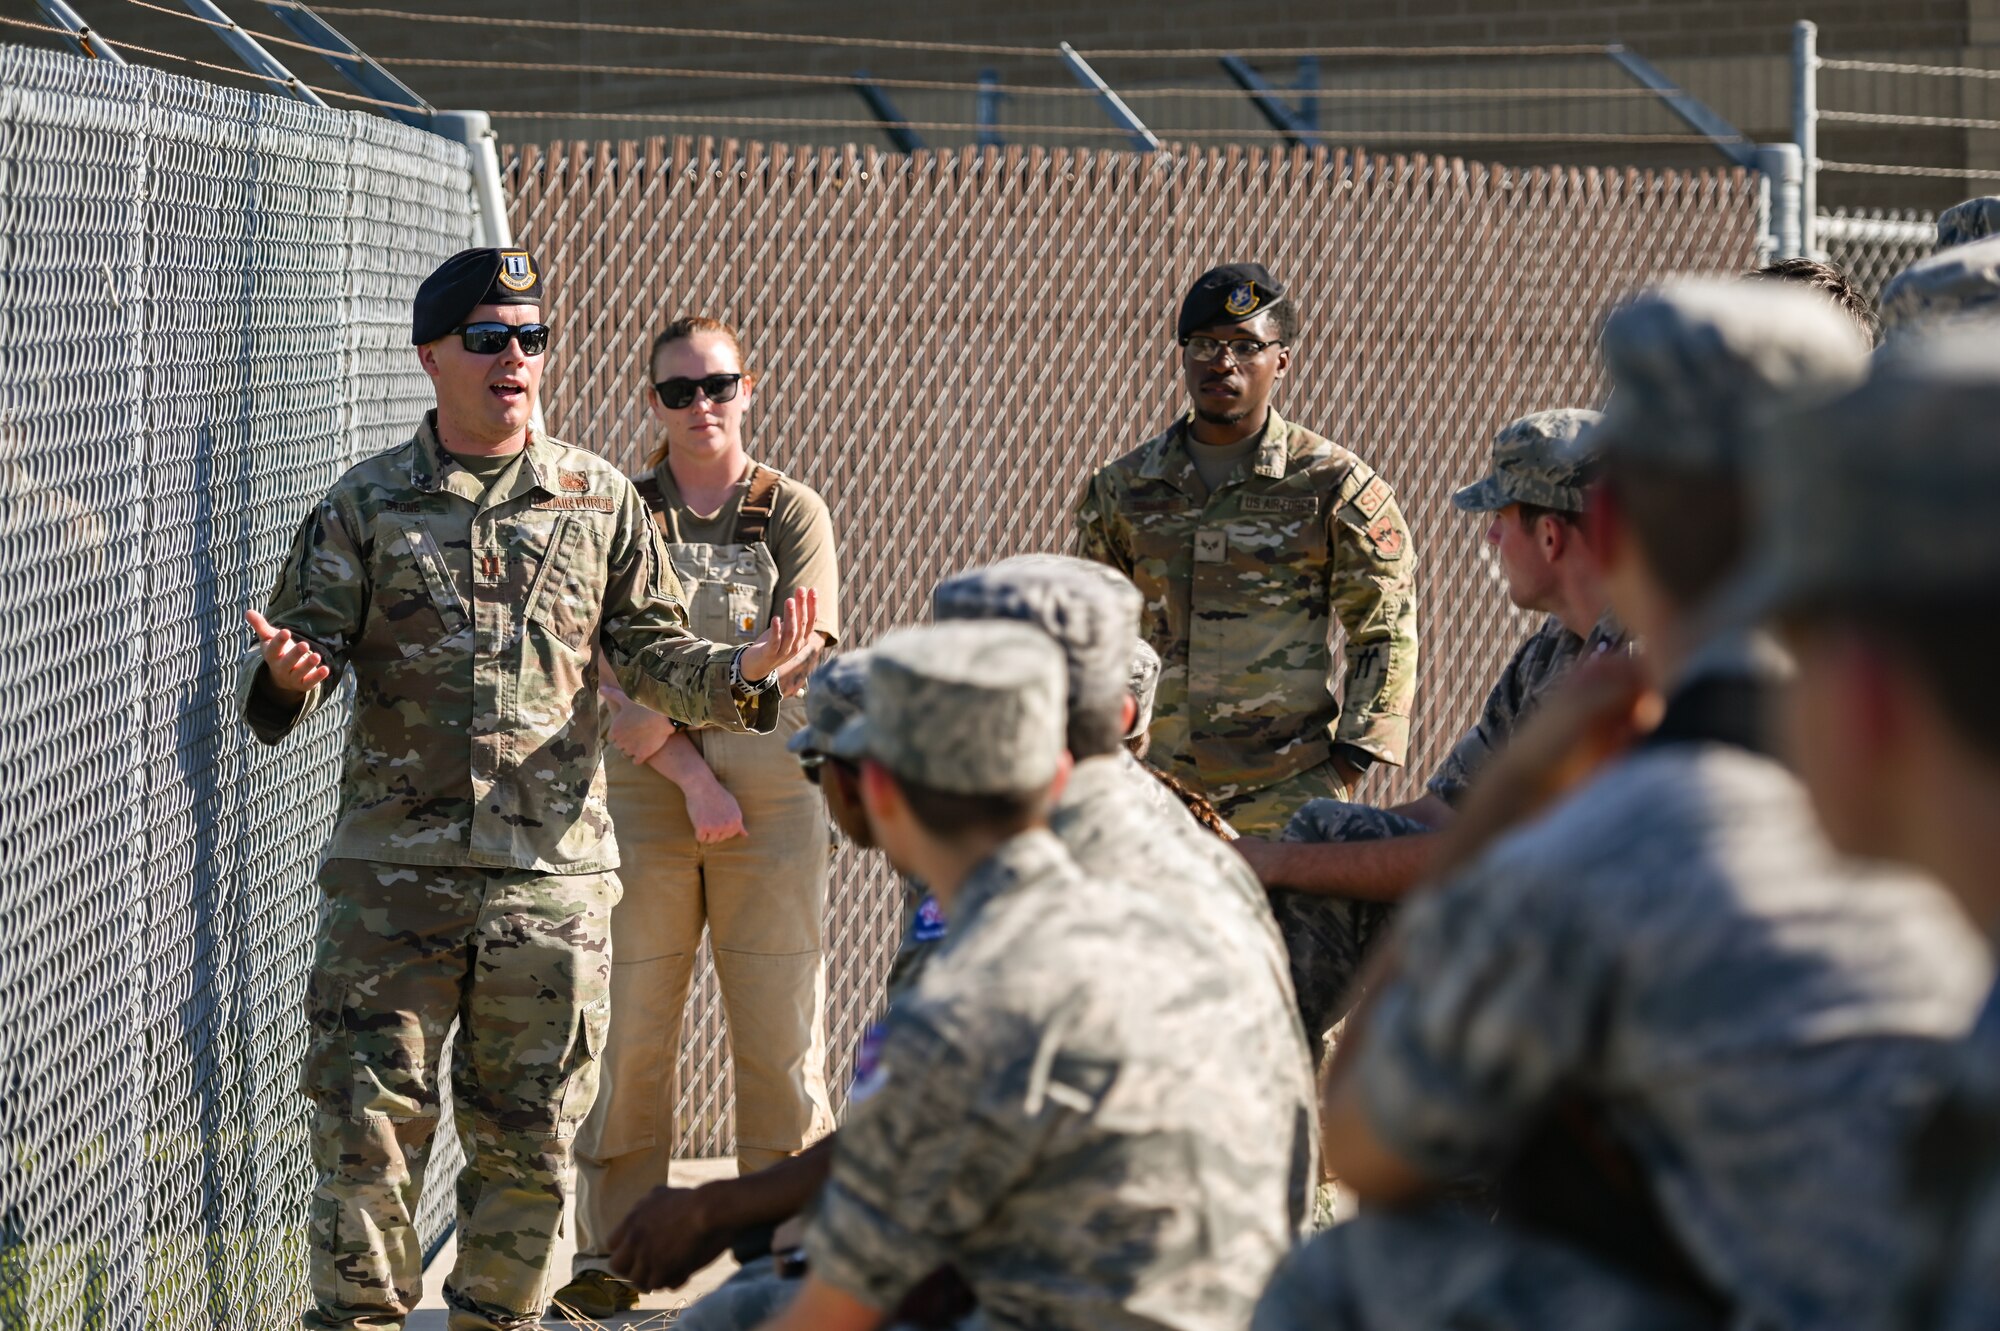 U.S. Air Force Capt. Robert Stone (left), 47th Security Forces Squadron commander, speaks to a group of Civil Air Patrol cadets at Laughlin Air Force Base, Texas, June 28, 2023.